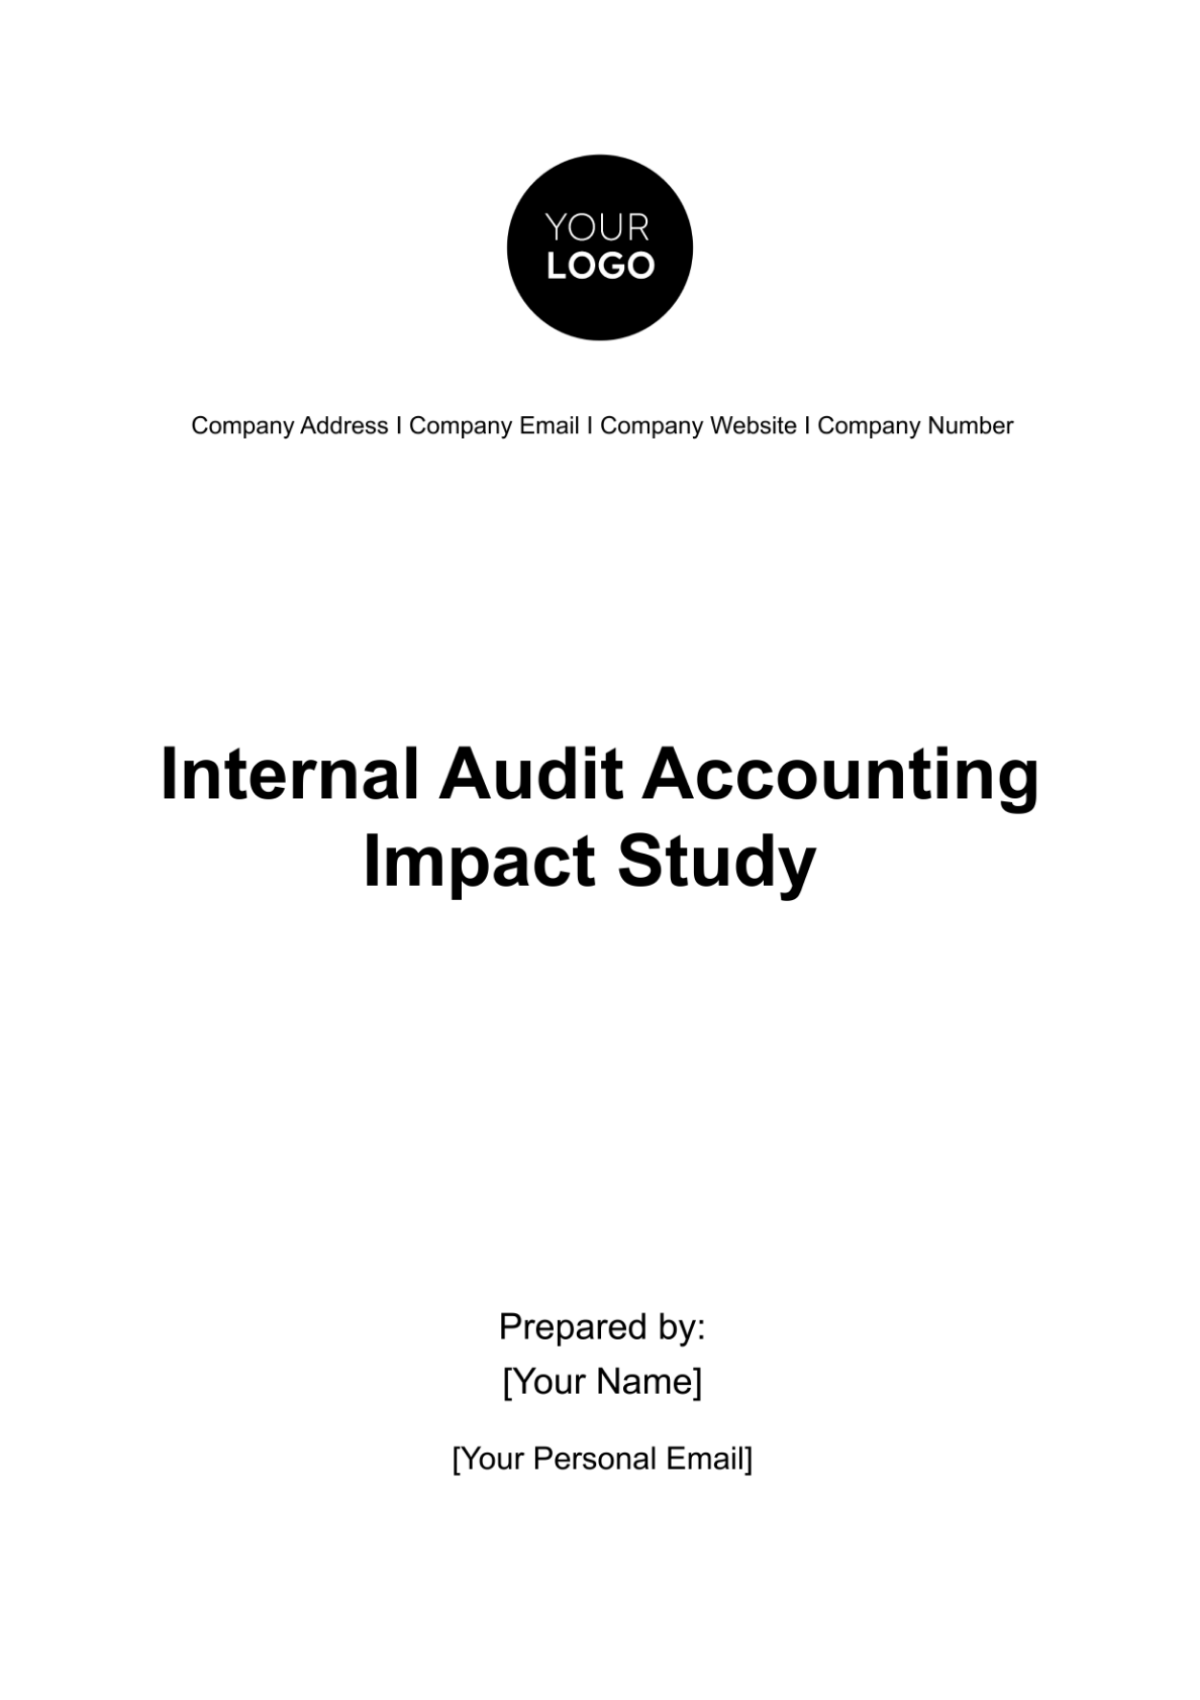 Internal Audit Accounting Impact Study Template